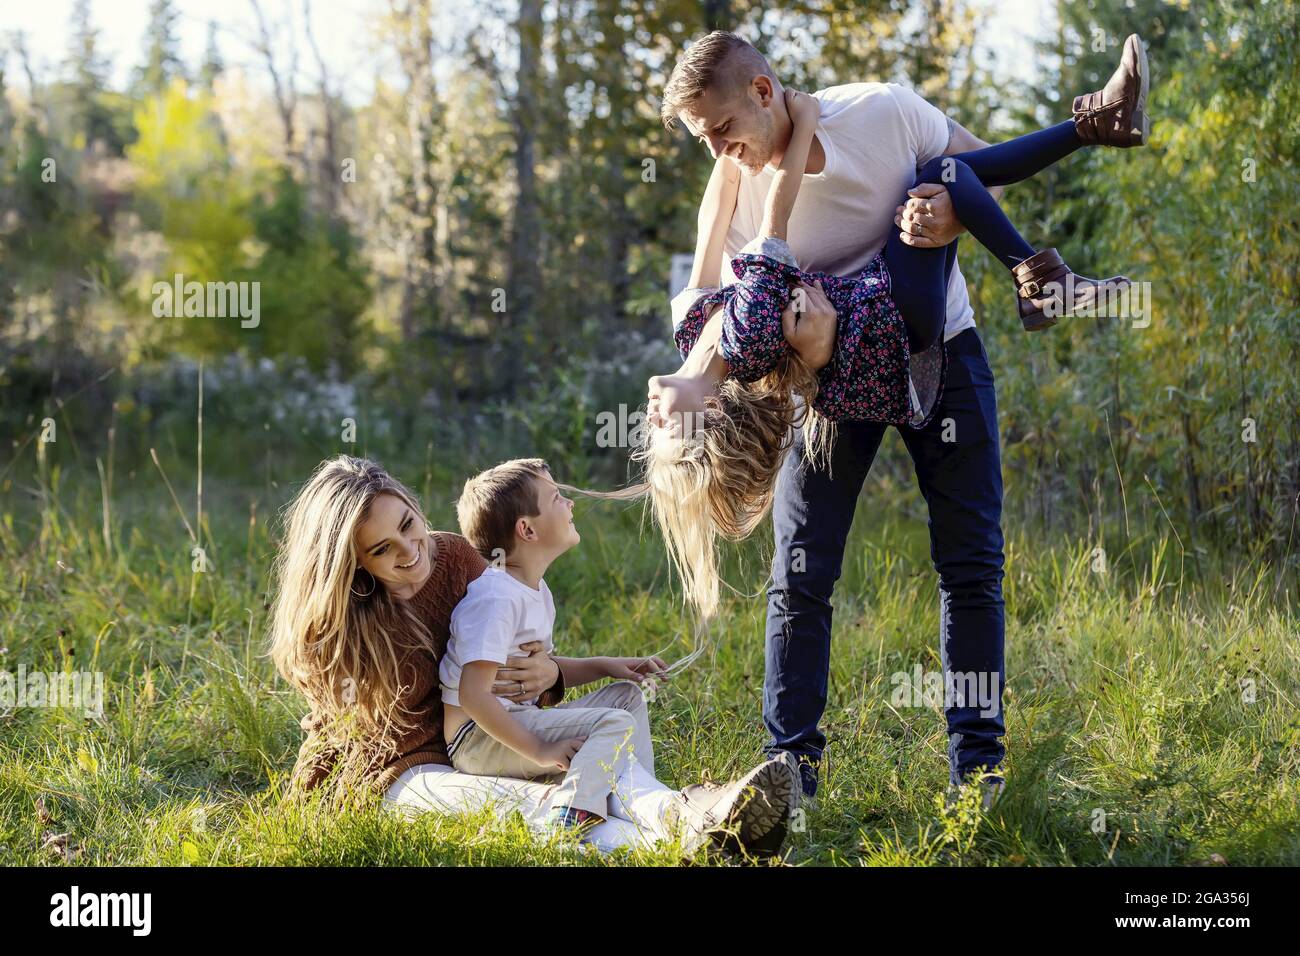 A family spending quality time together outdoors in a city park during the fall season; Edmonton, Alberta, Canada Stock Photo